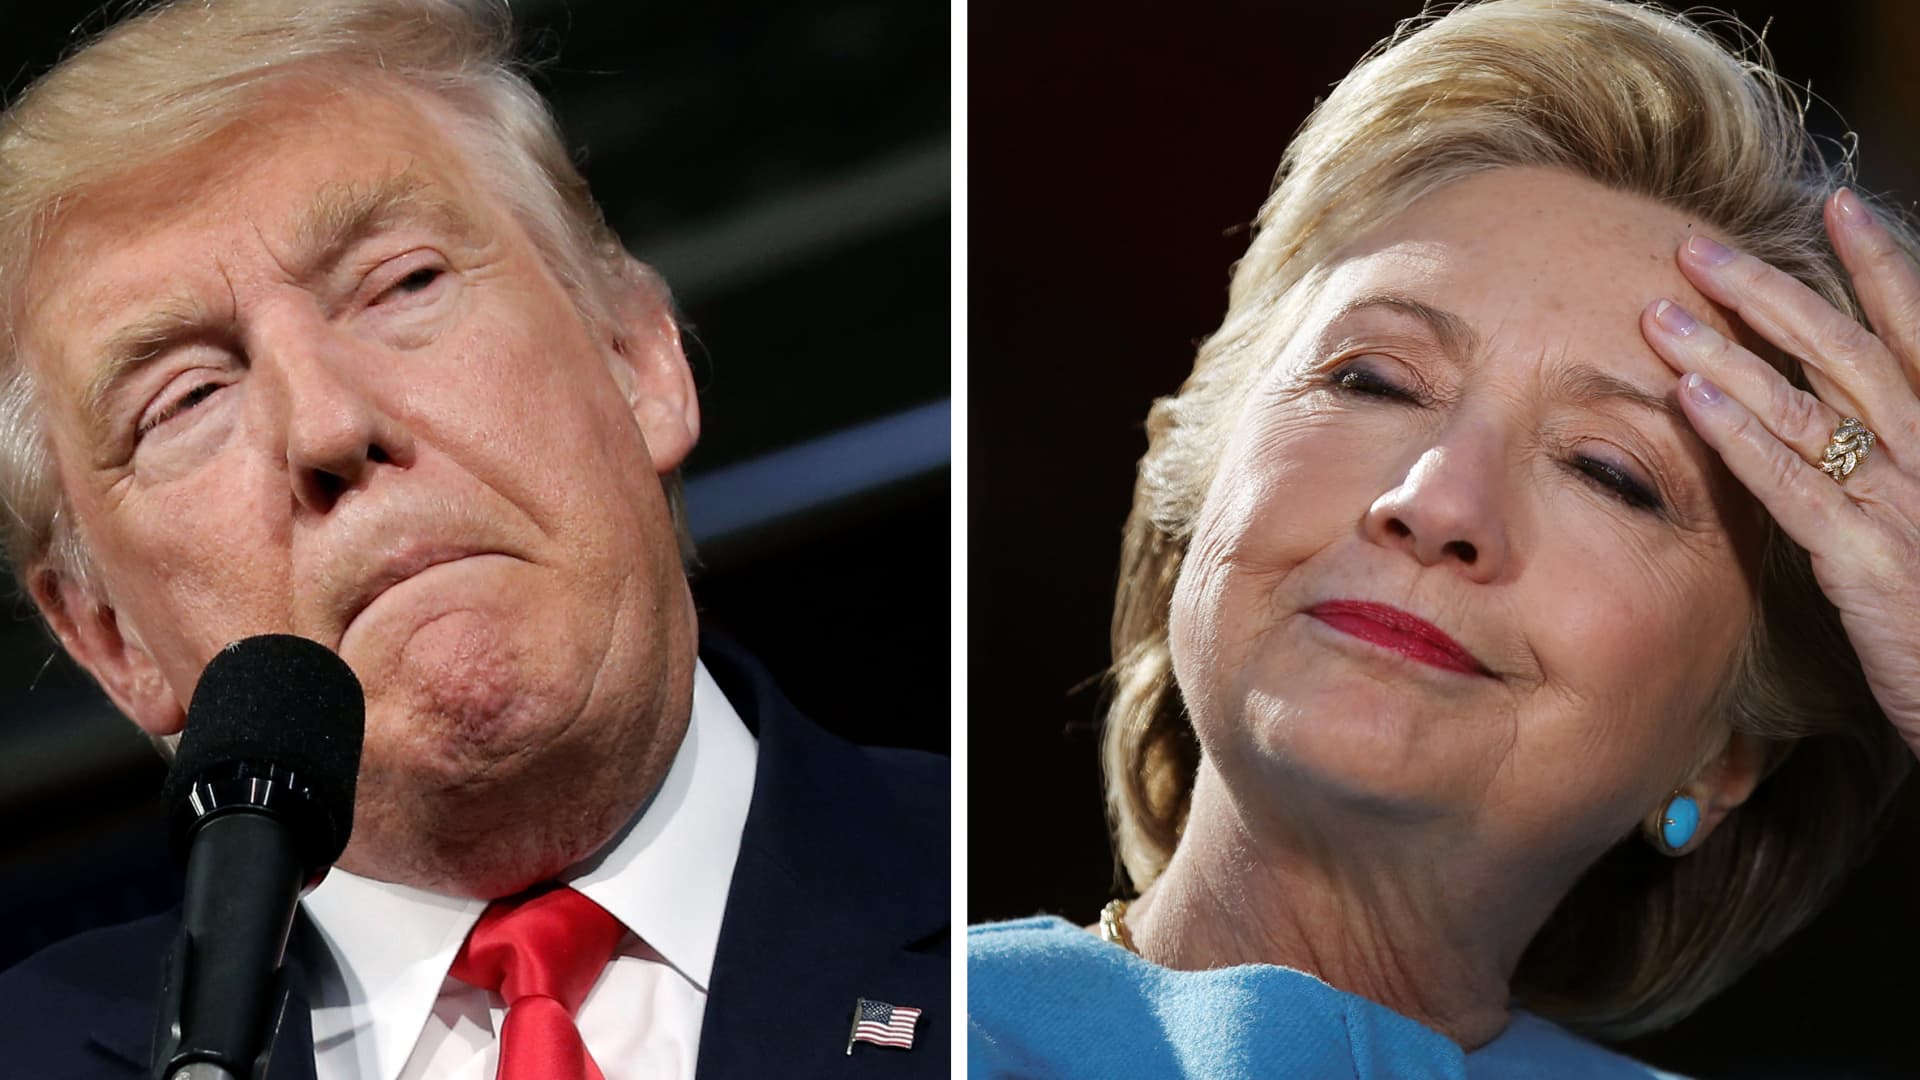 Trump appeals nearly $1 million in sanctions for ‘frivolous’ suit he filed against Hillary Clinton